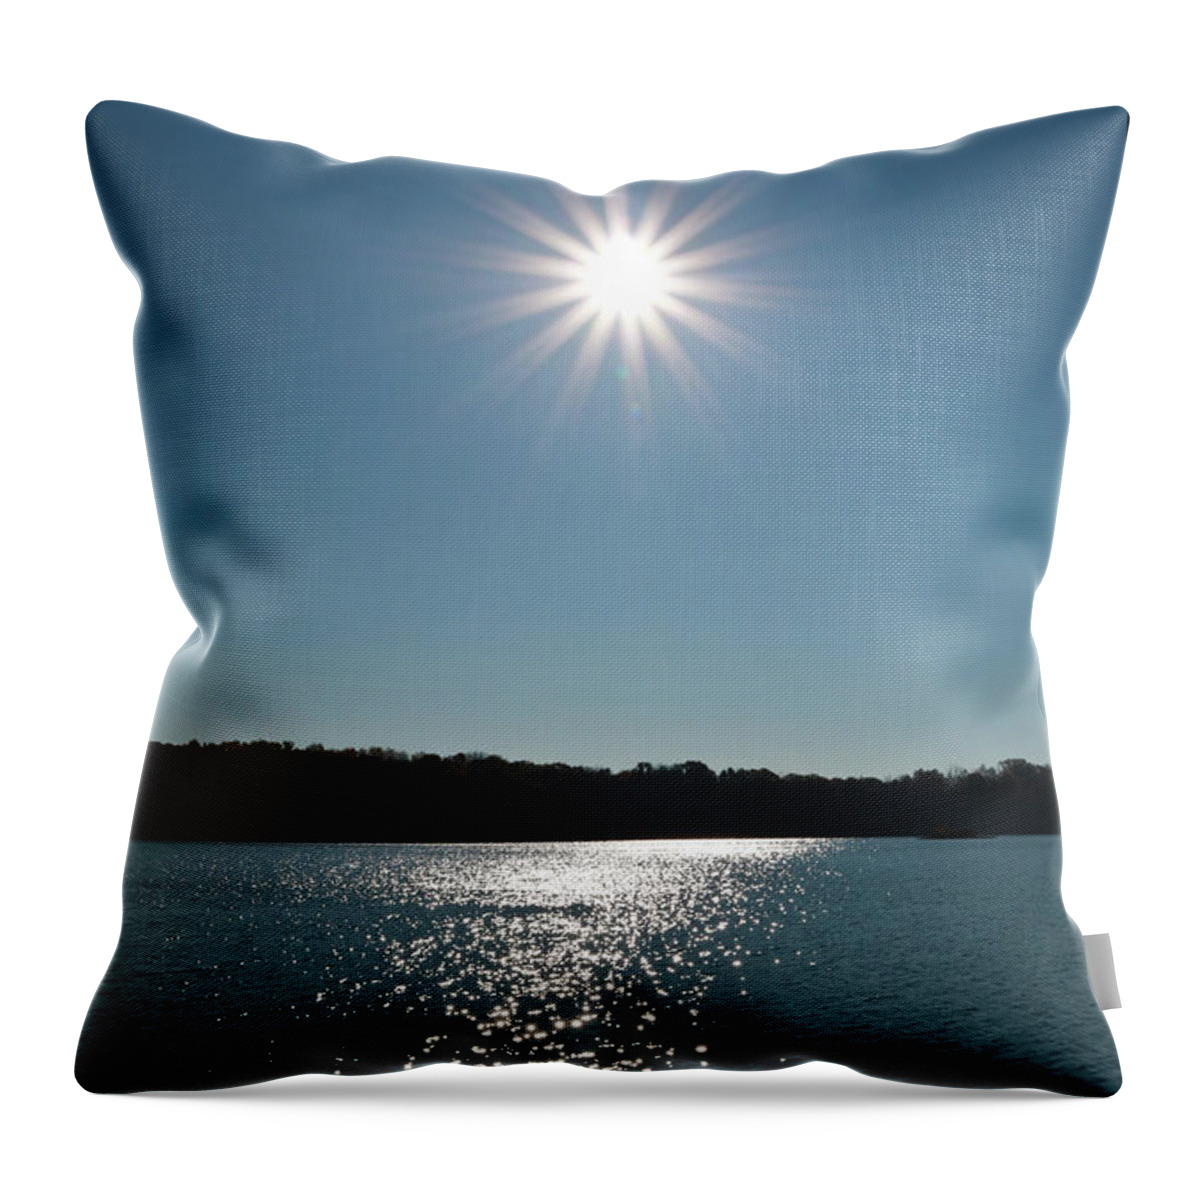 Christian Throw Pillow featuring the photograph Starlight Starbright by Anita Oakley